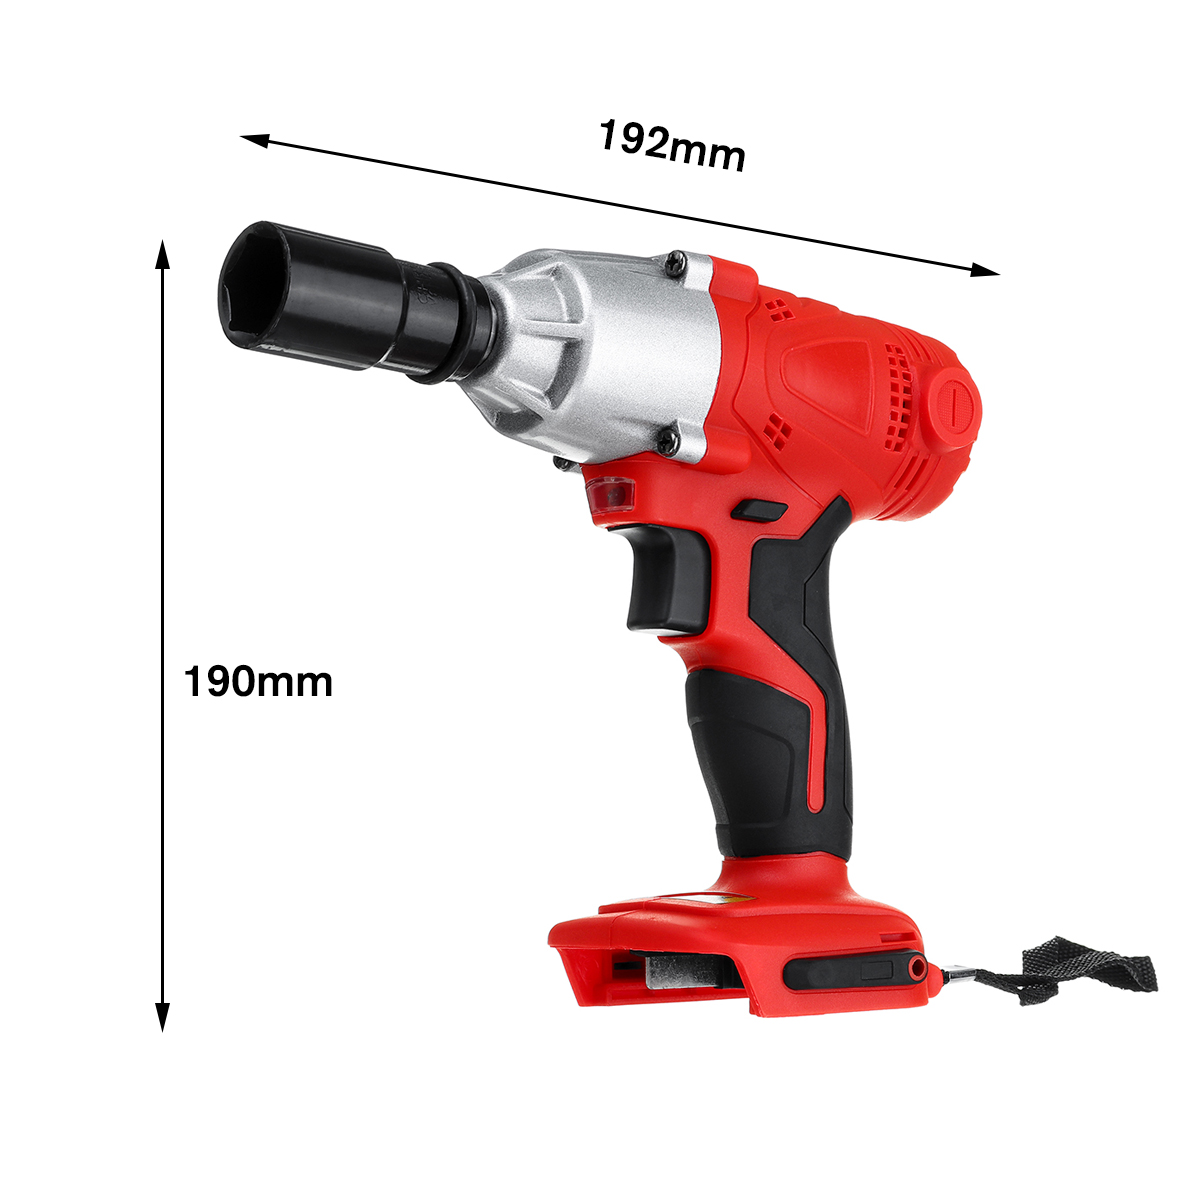 180V-240V-Cordless-LED-Light-Impact-Wrench-50Hz-350-Nm-Waterproof-Electric-Wrench-Adapted-To-18V-Mak-1590254-6